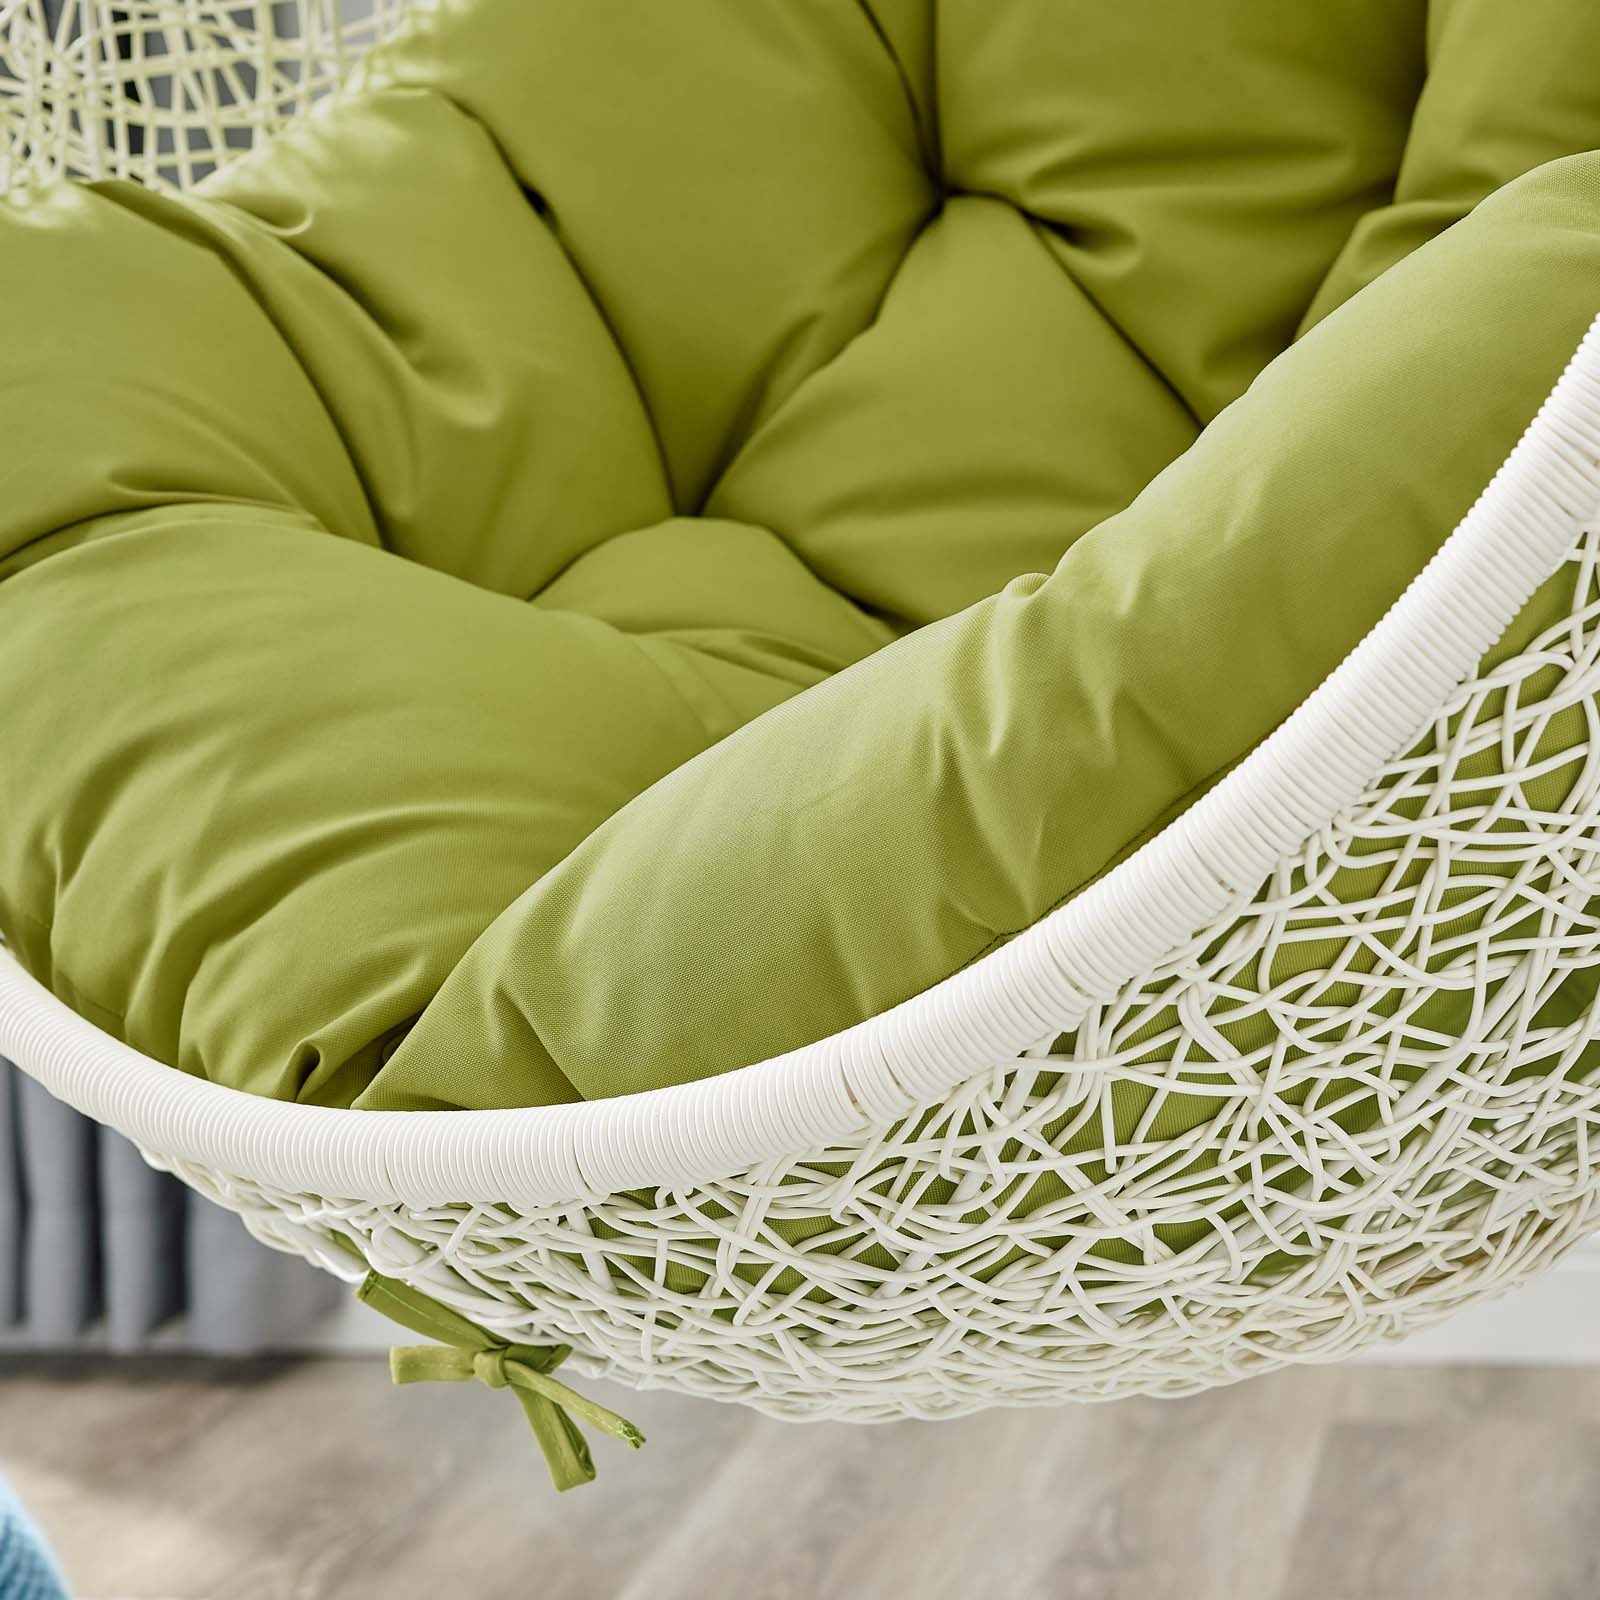 Hide Outdoor Patio Swing Chair With Stand - East Shore Modern Home Furnishings